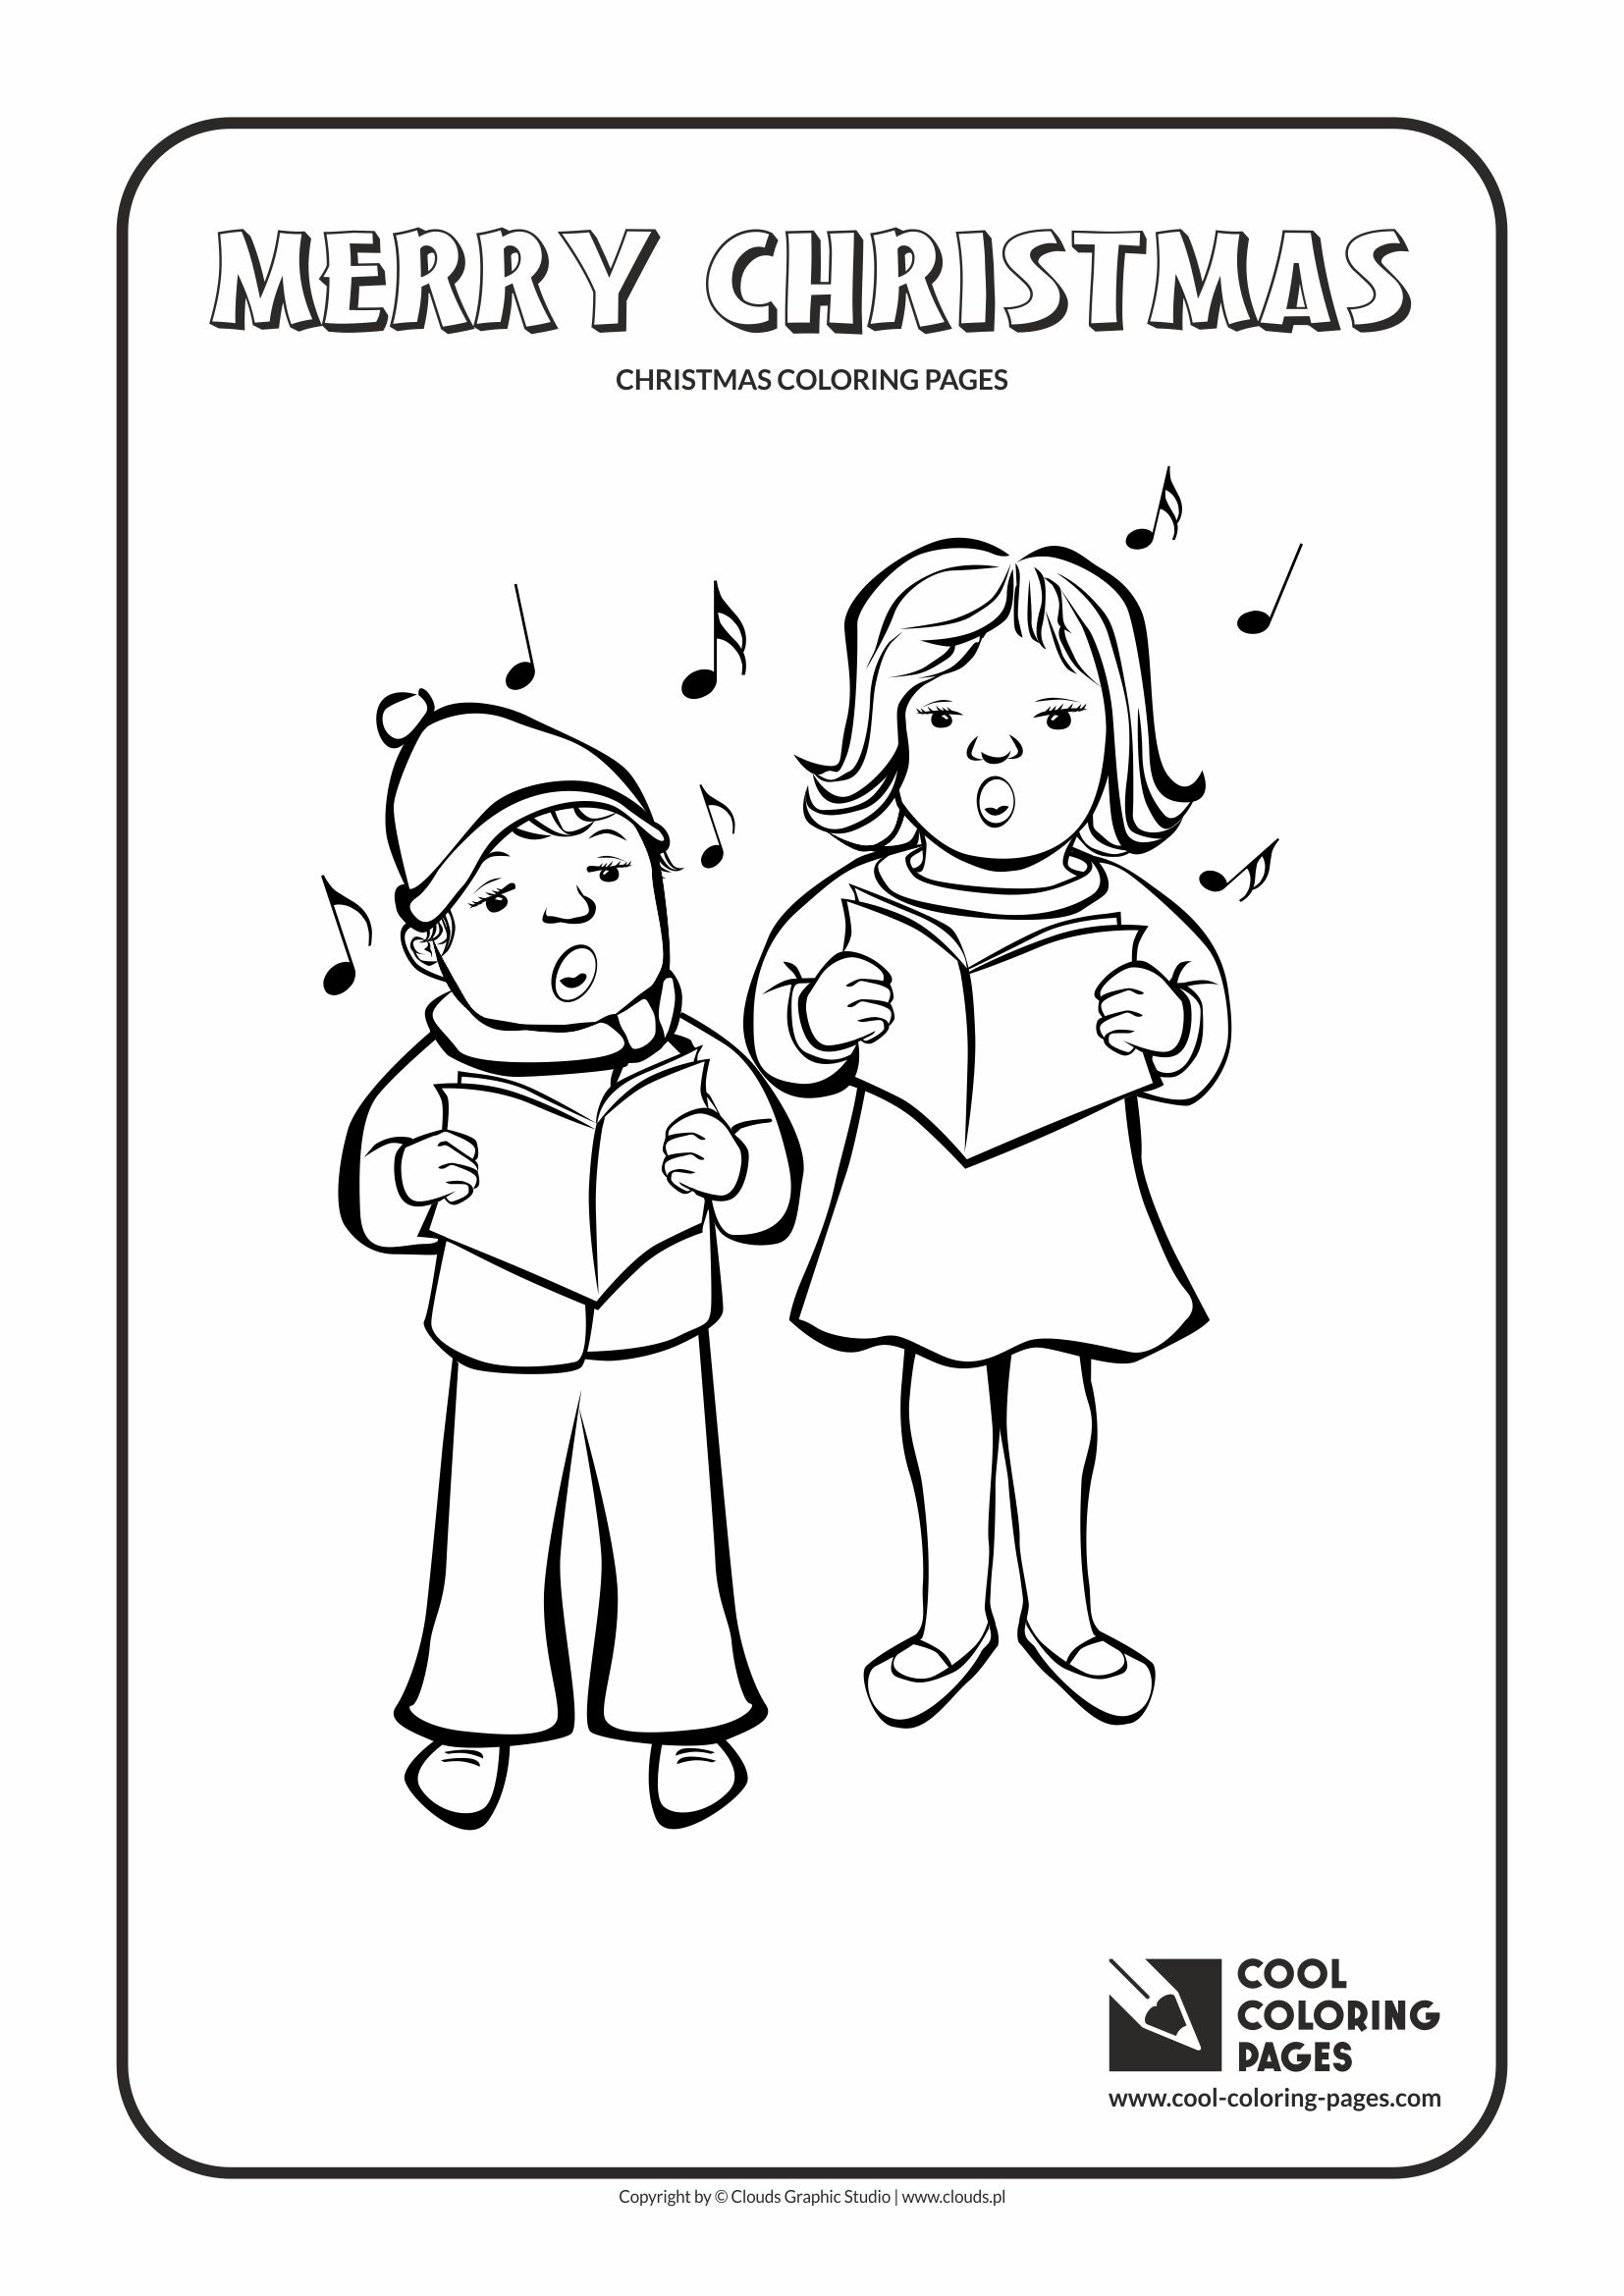 Cool Coloring Pages - Holidays / Carolers / Coloring page with carolers